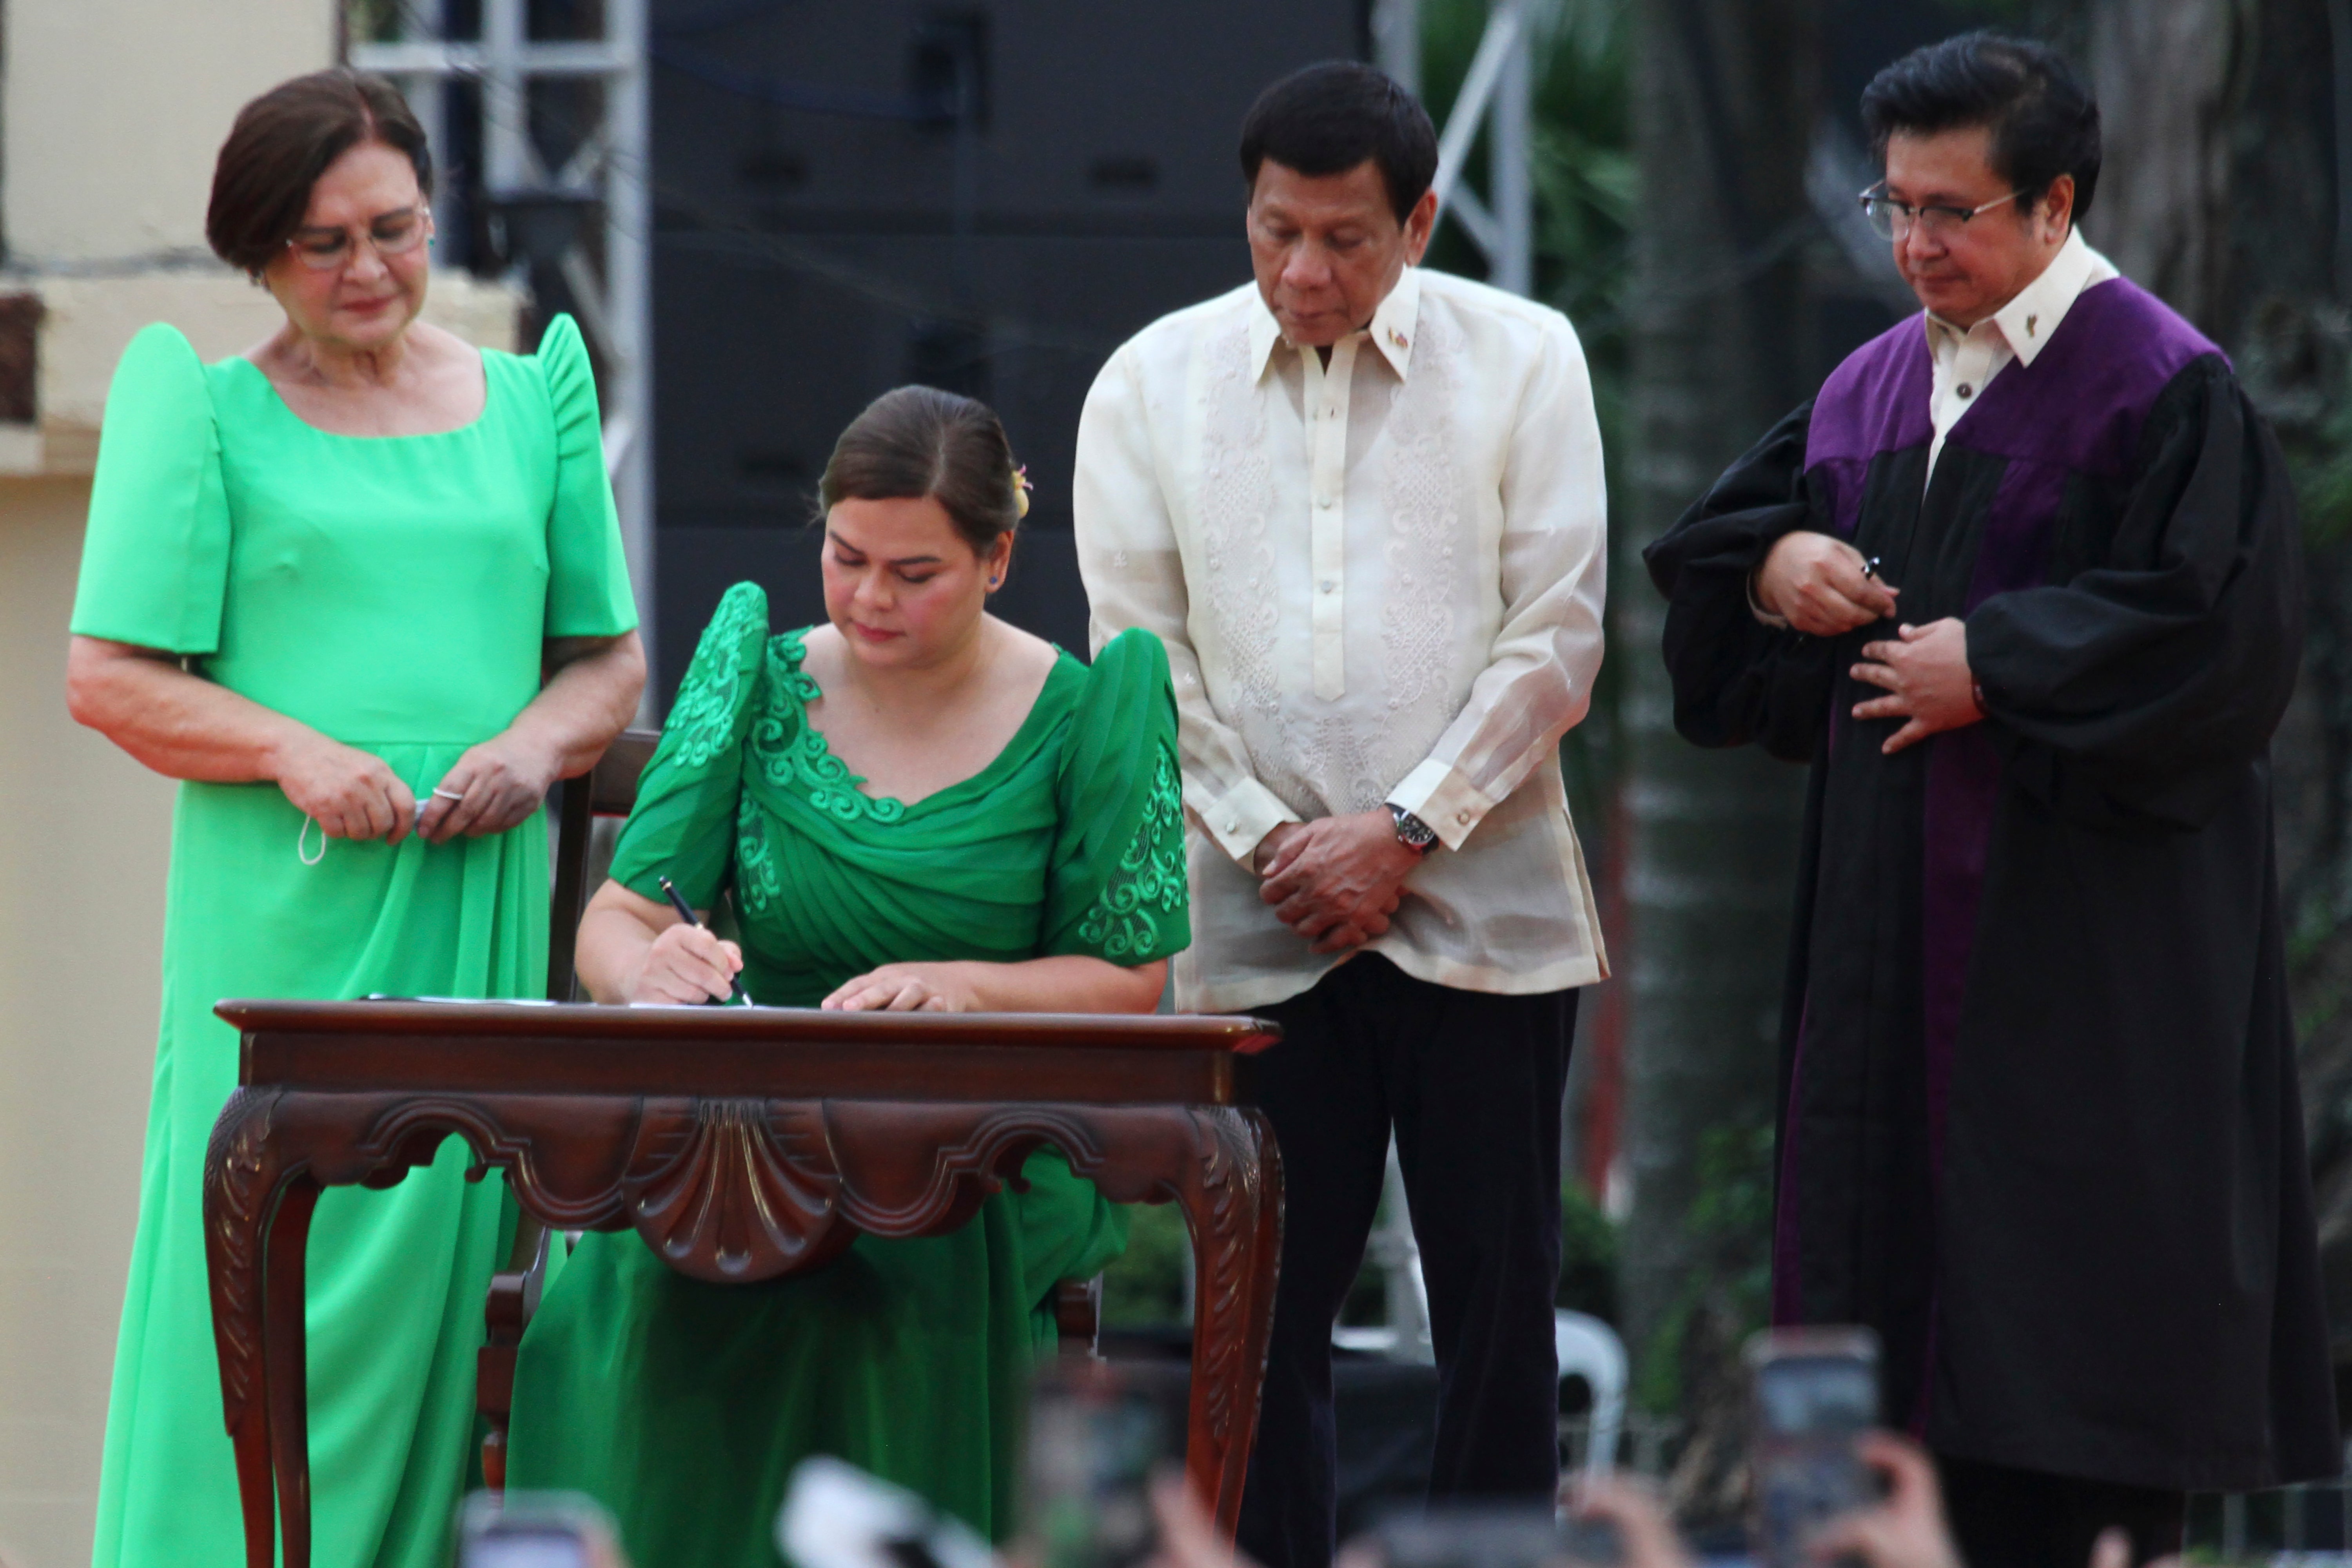 Sara Duterte takes her oath as vice president as her father looks on